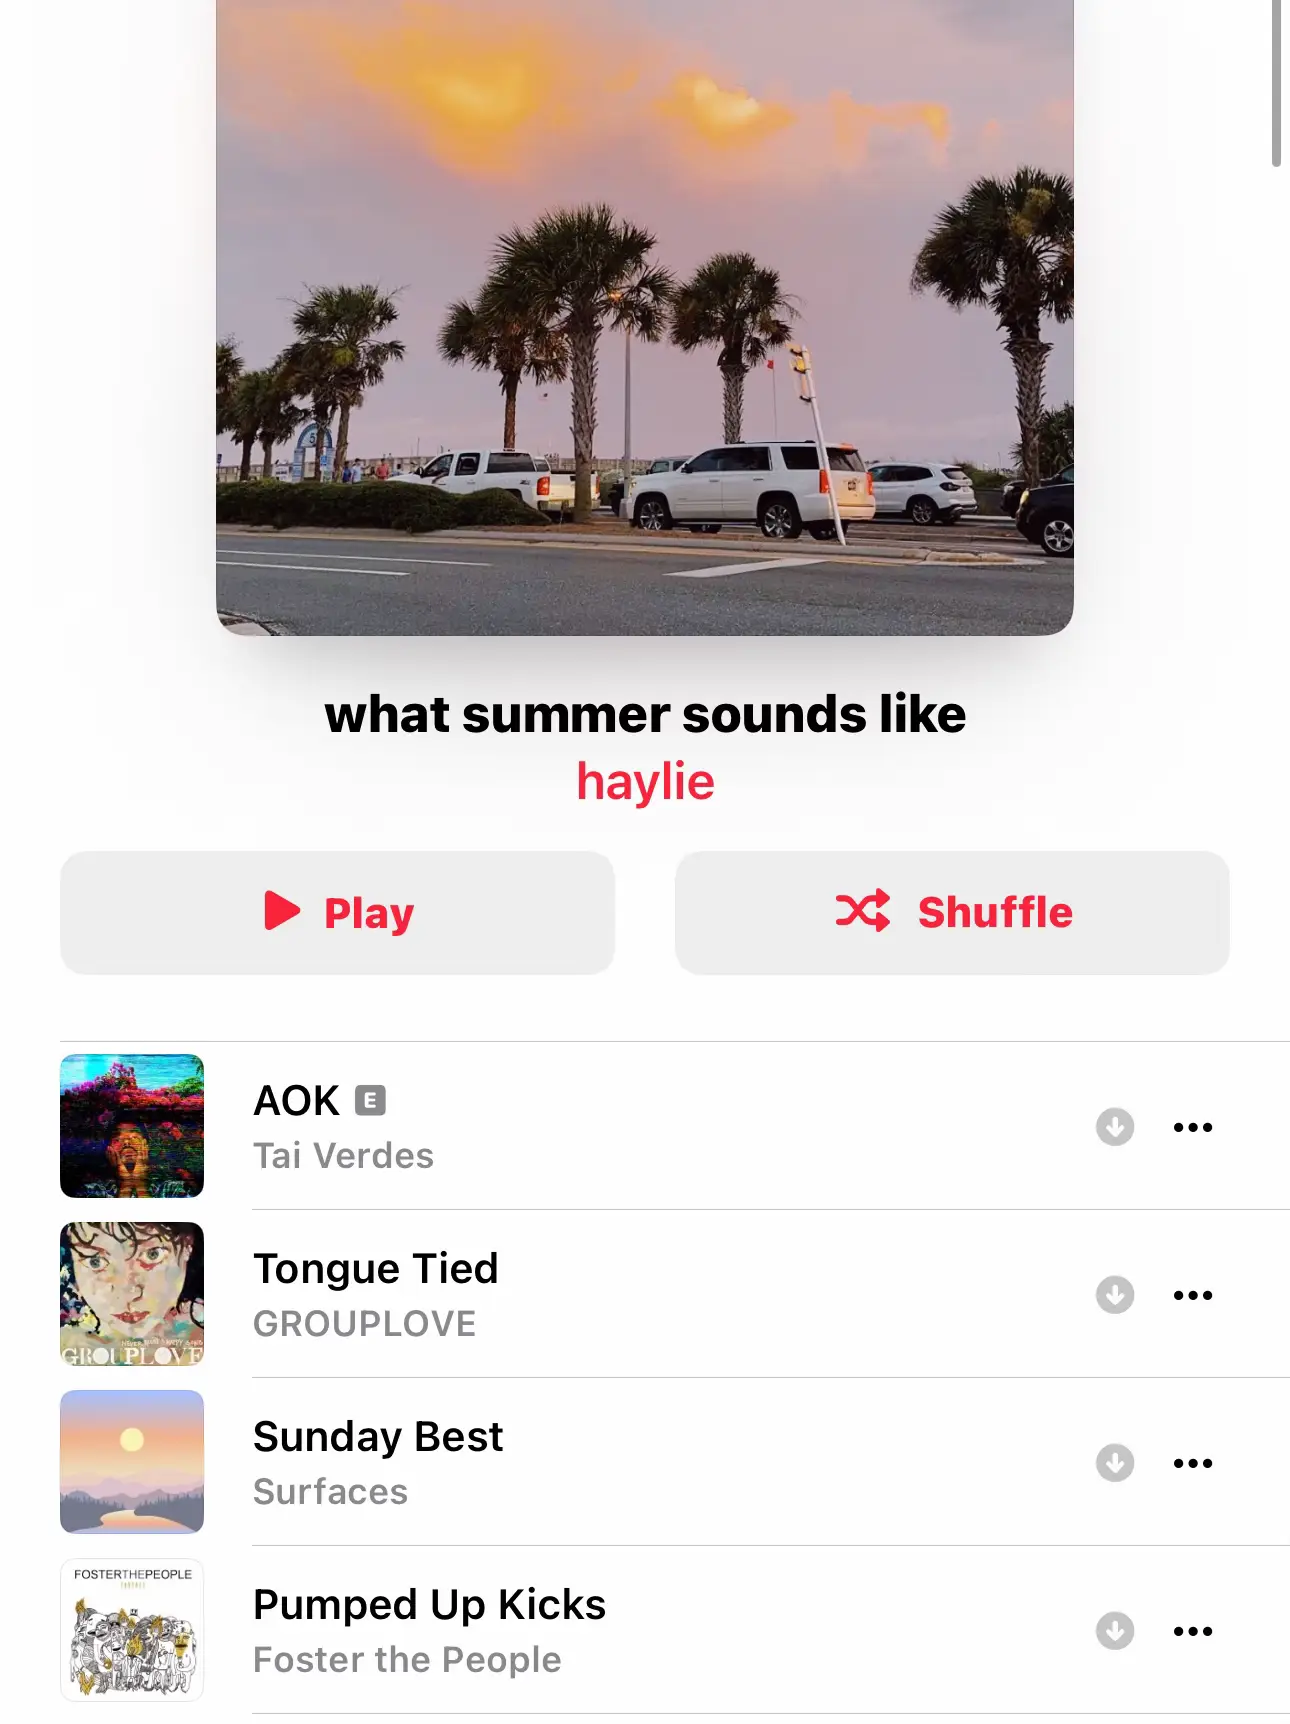  A playlist of music for the summer.